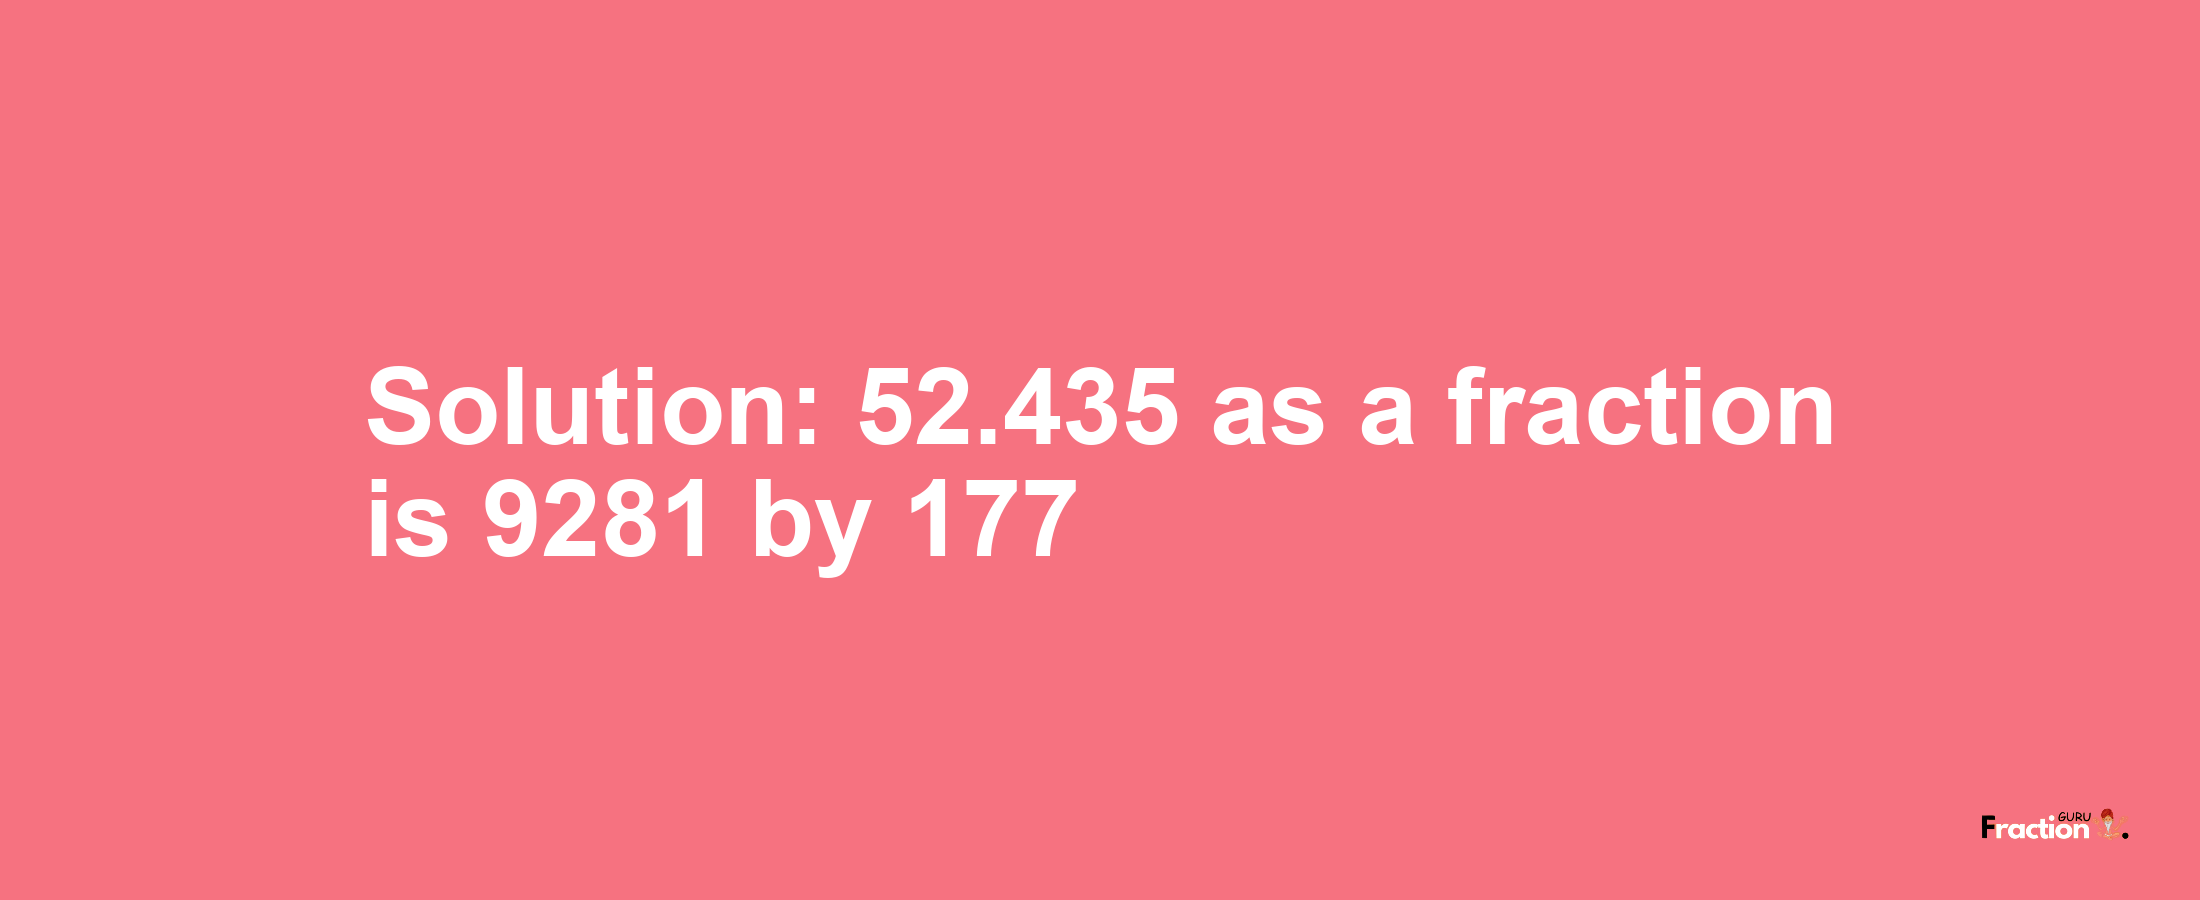 Solution:52.435 as a fraction is 9281/177